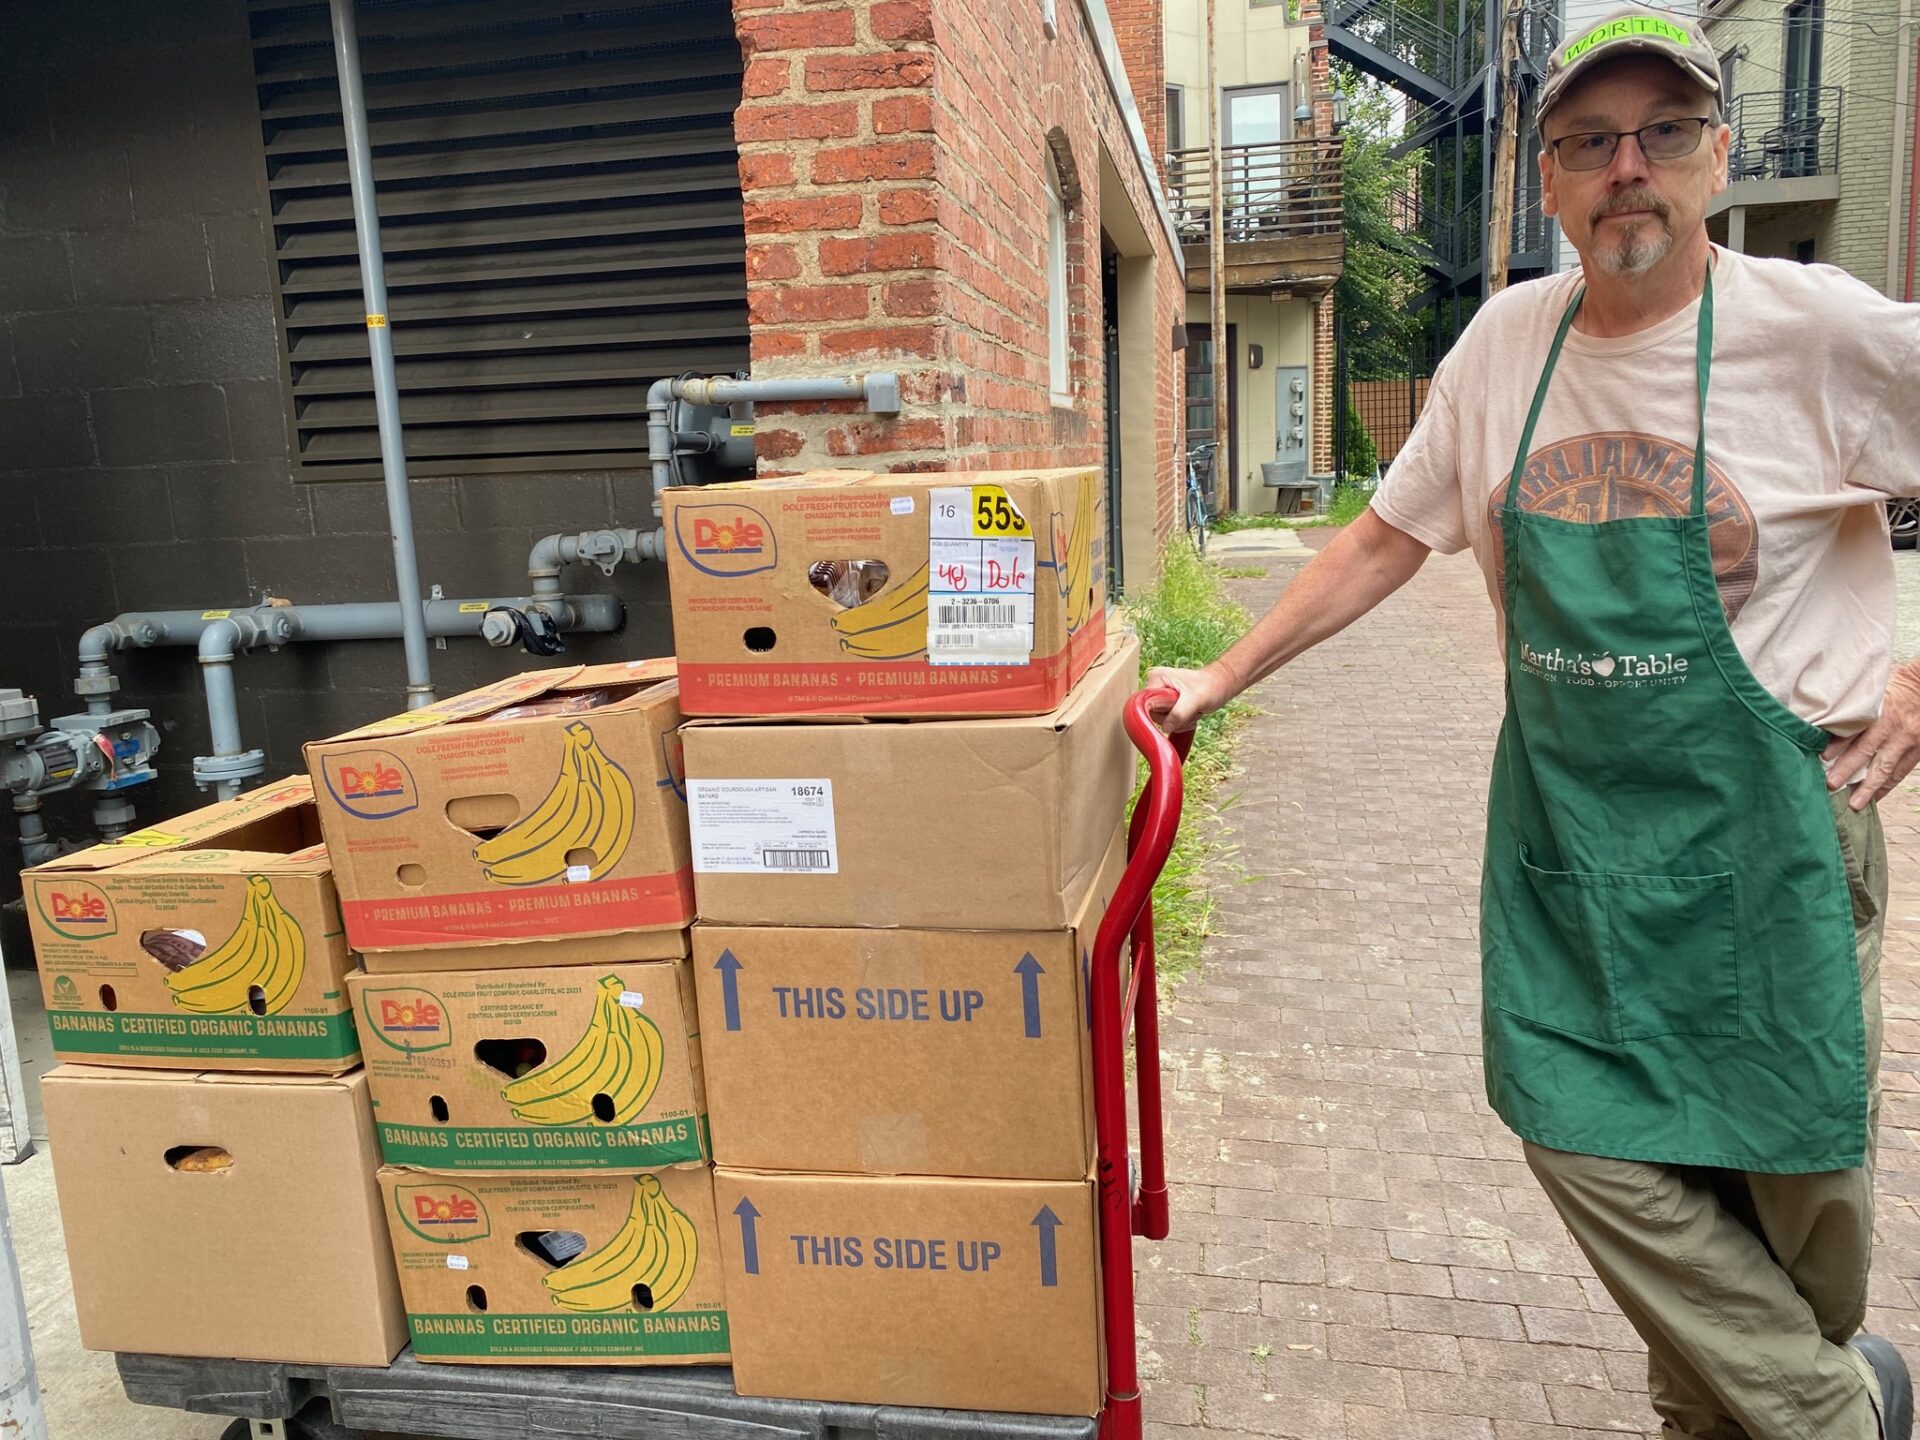 A man stands with a cart loaded with boxes of recovered food